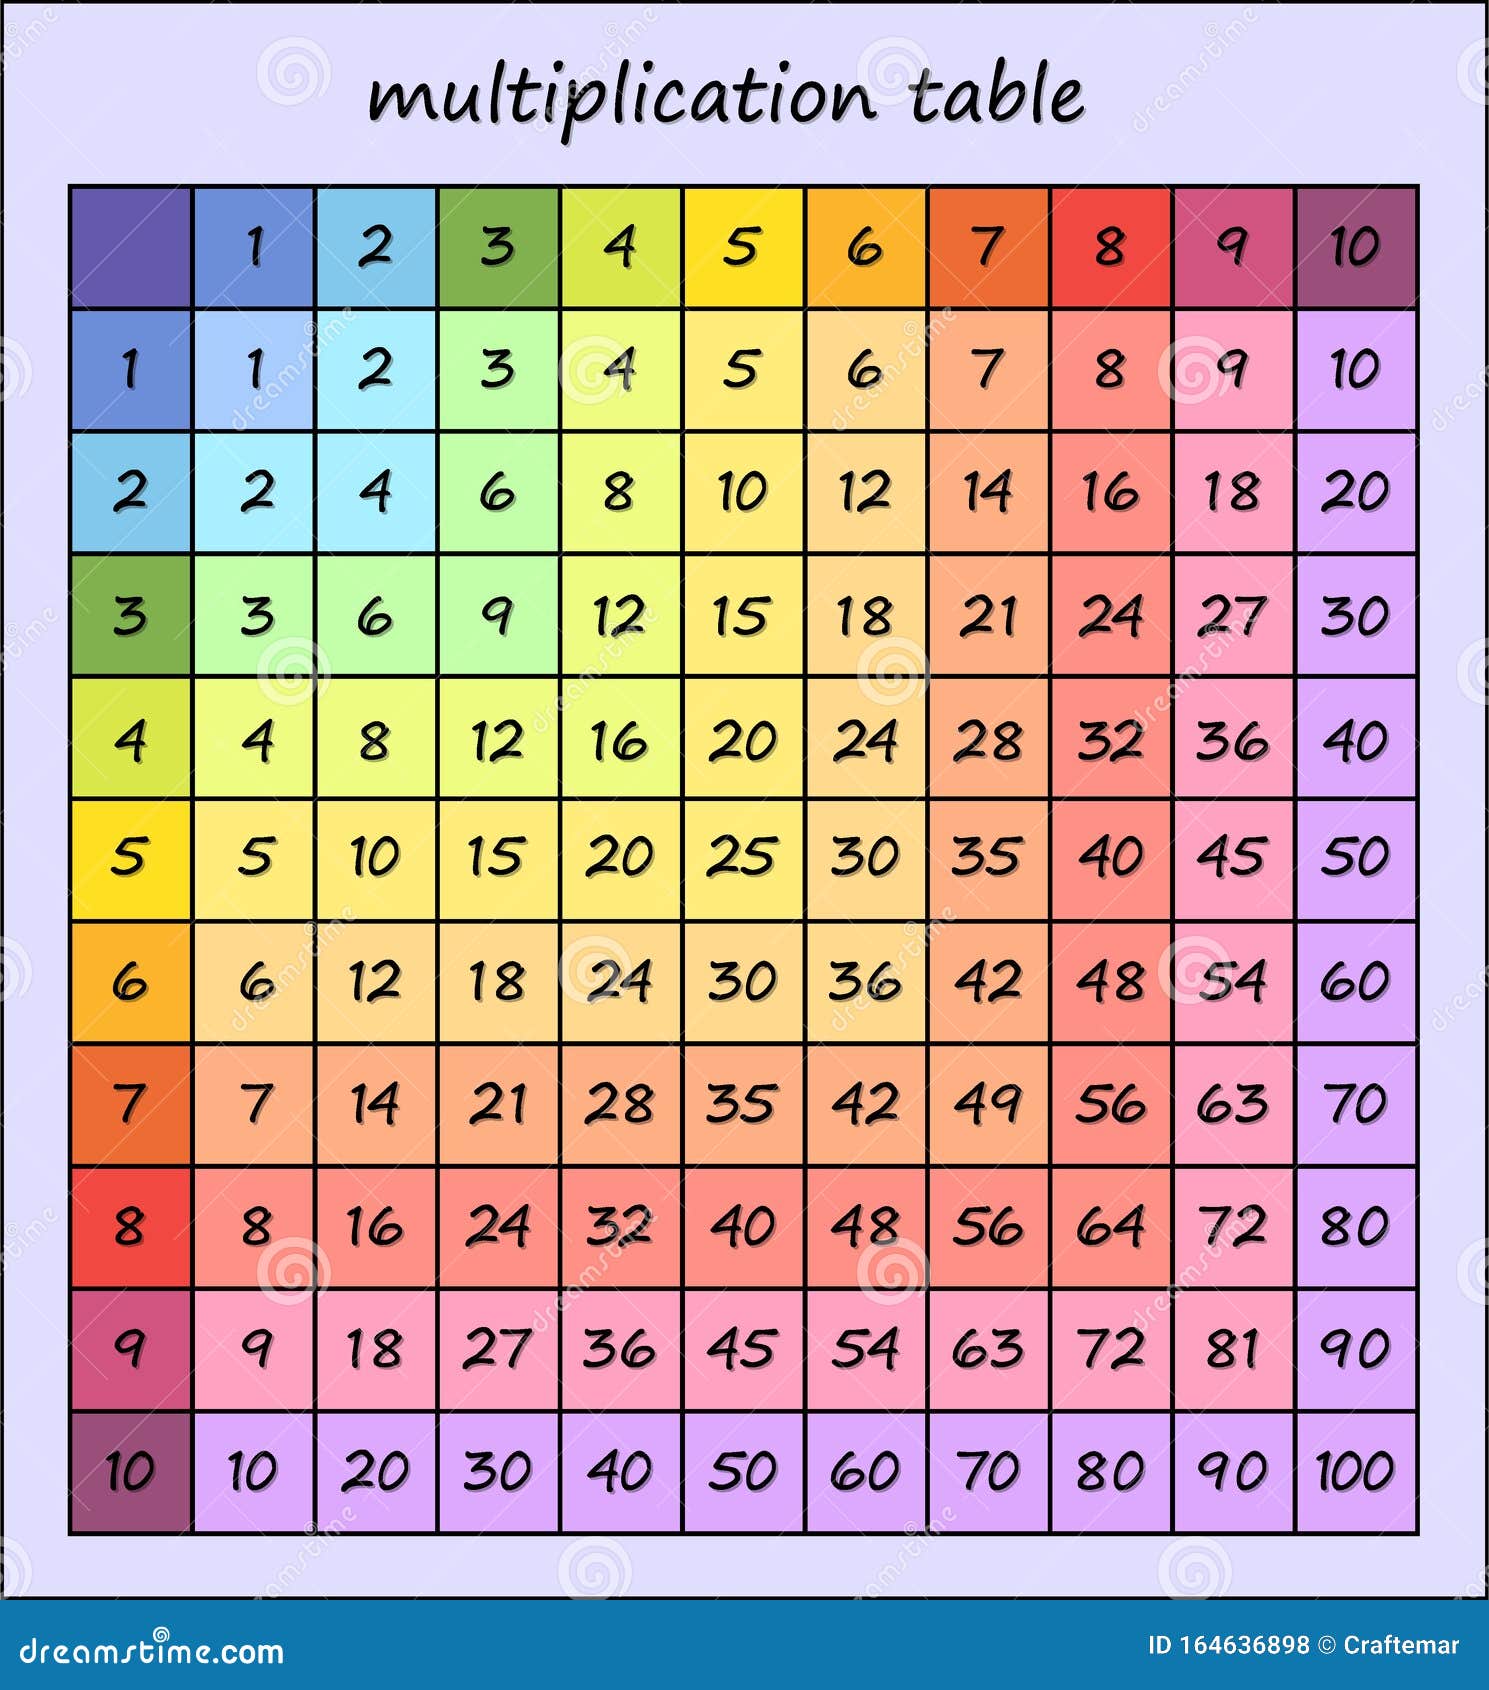 Multiplication Table, Multi-colored Multiplication Square. Vector